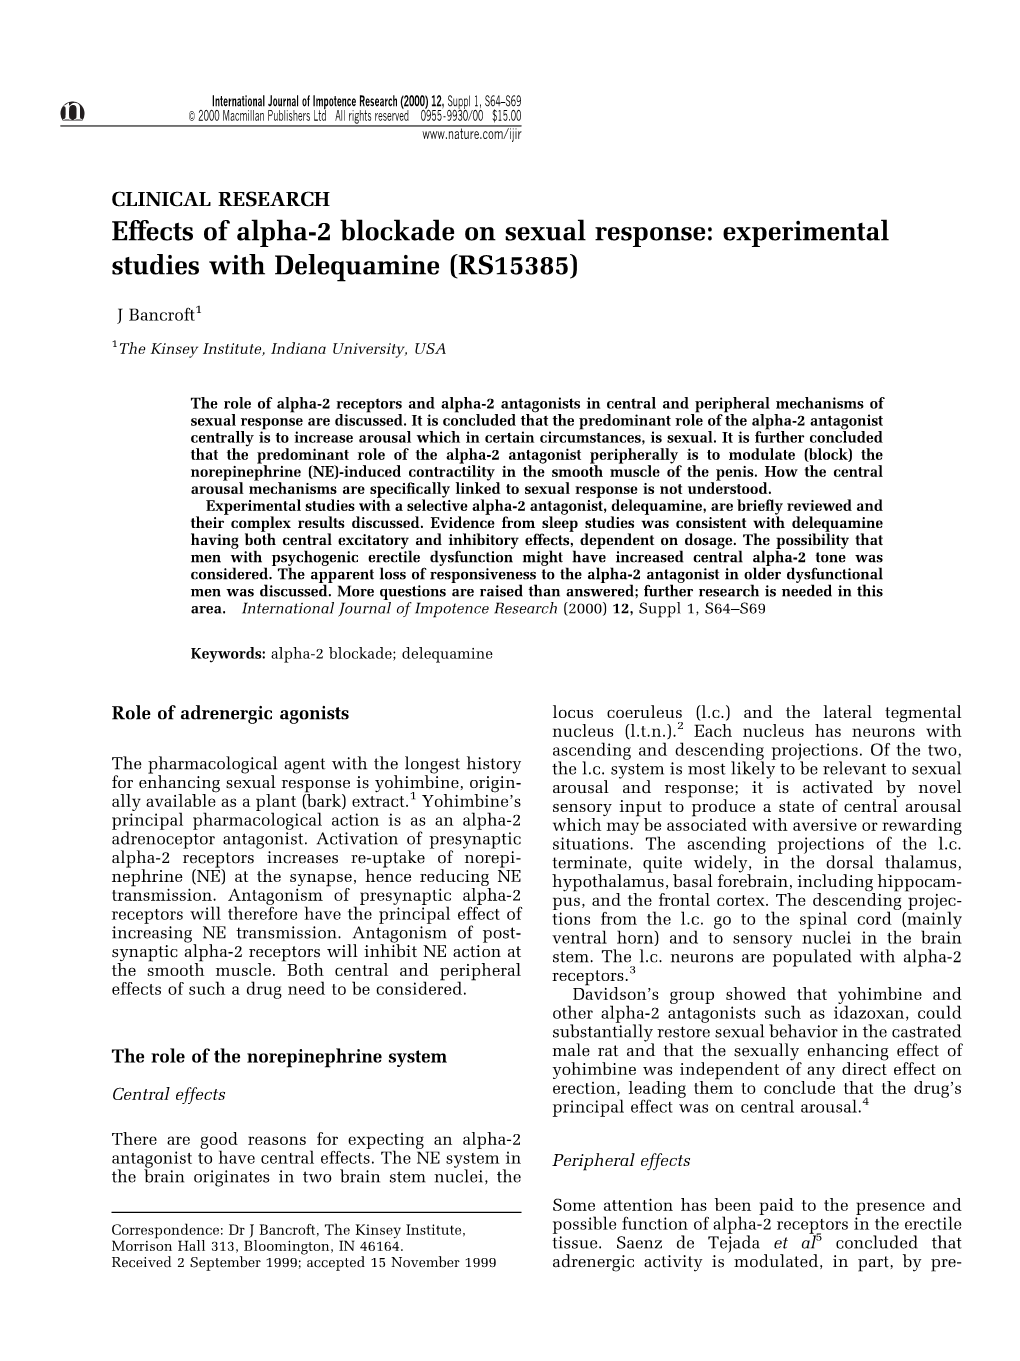 Effects of Alpha-2 Blockade on Sexual Response: Experimental Studies with Delequamine (RS15385)